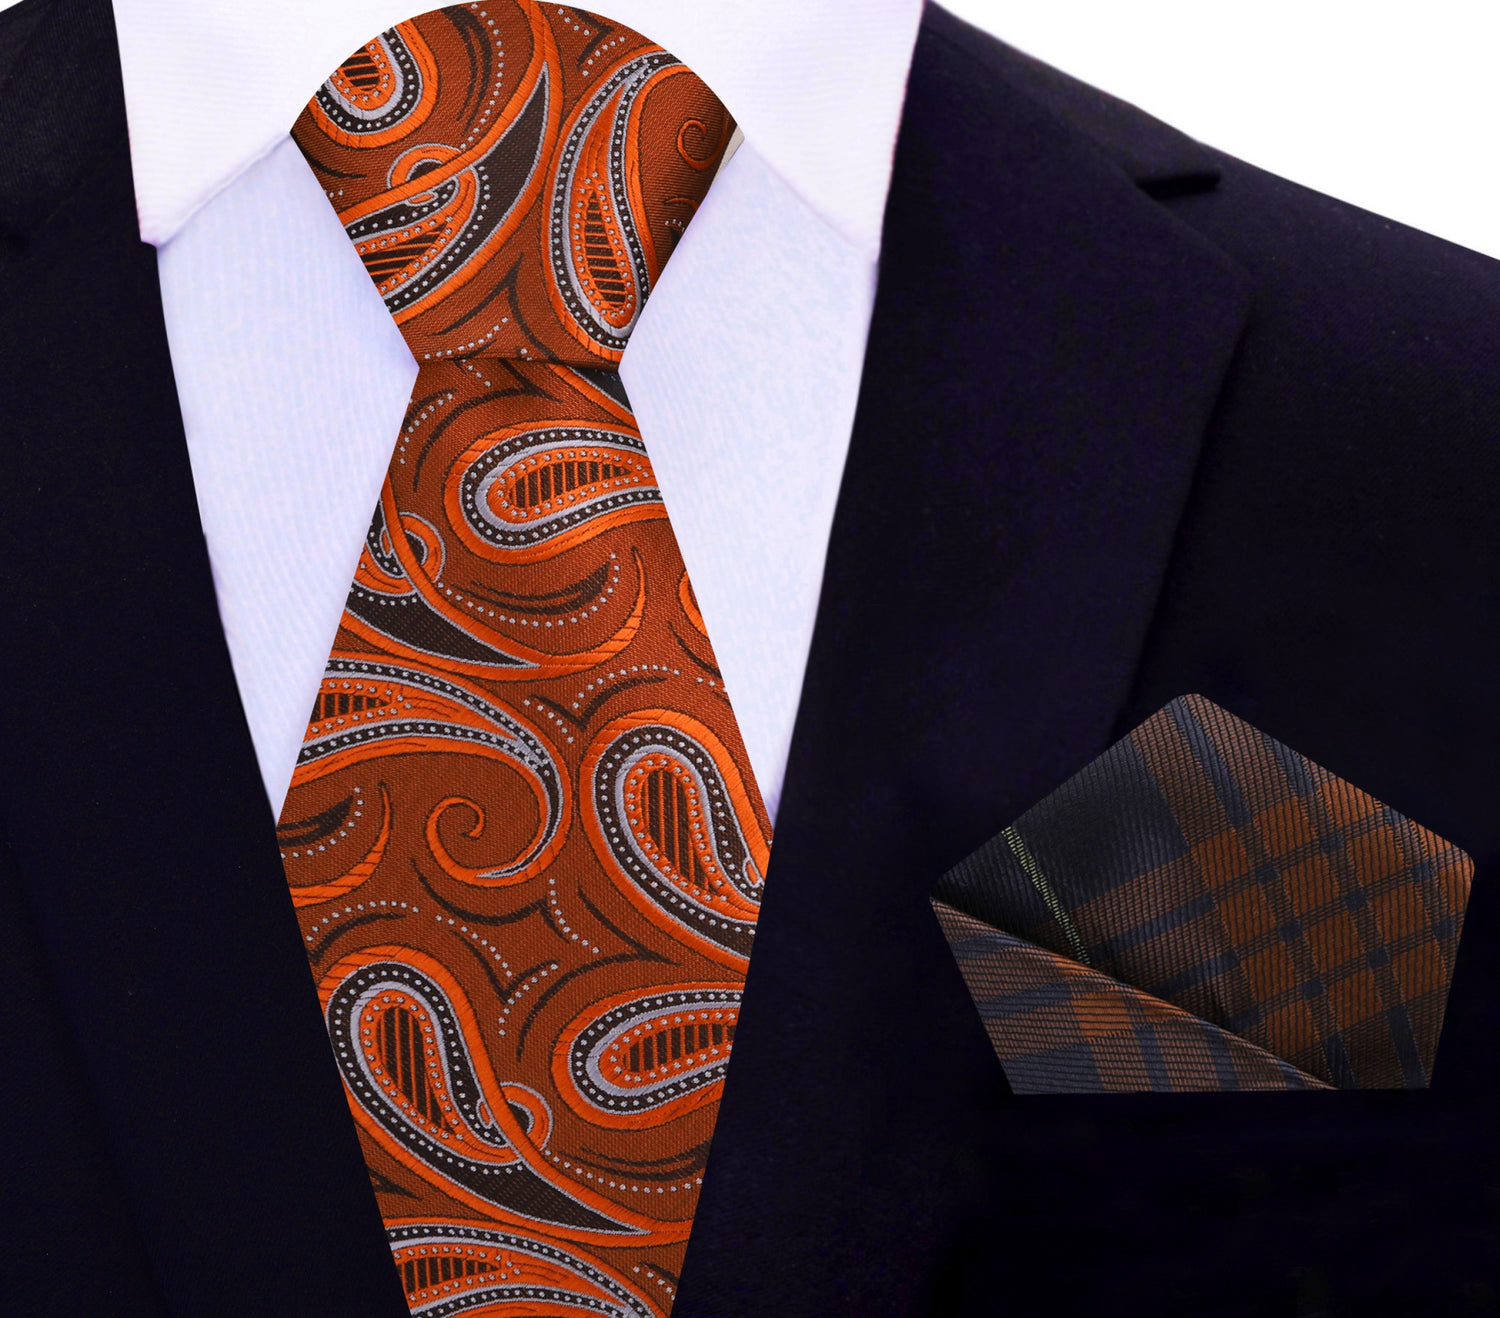 View 2: Orange and Brown Paisley Necktie and Brown and Blue Plaid Square